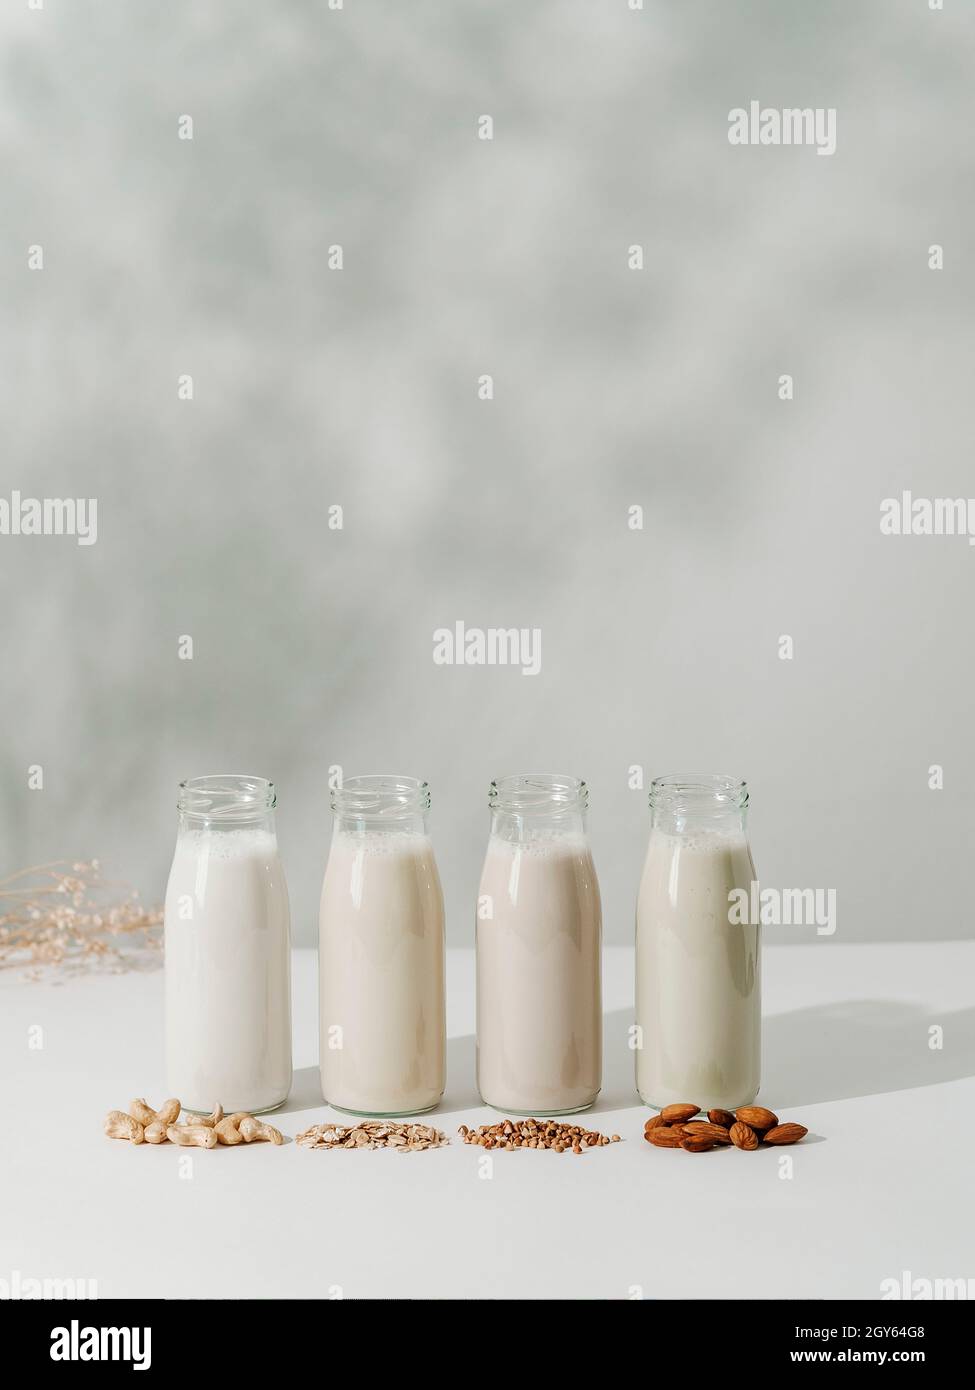 Different types non-dairy vegan milk in glass bottles on white tabletop with floral shadows on wall background. Cashew, oat, buckwheat, almond milk as Stock Photo